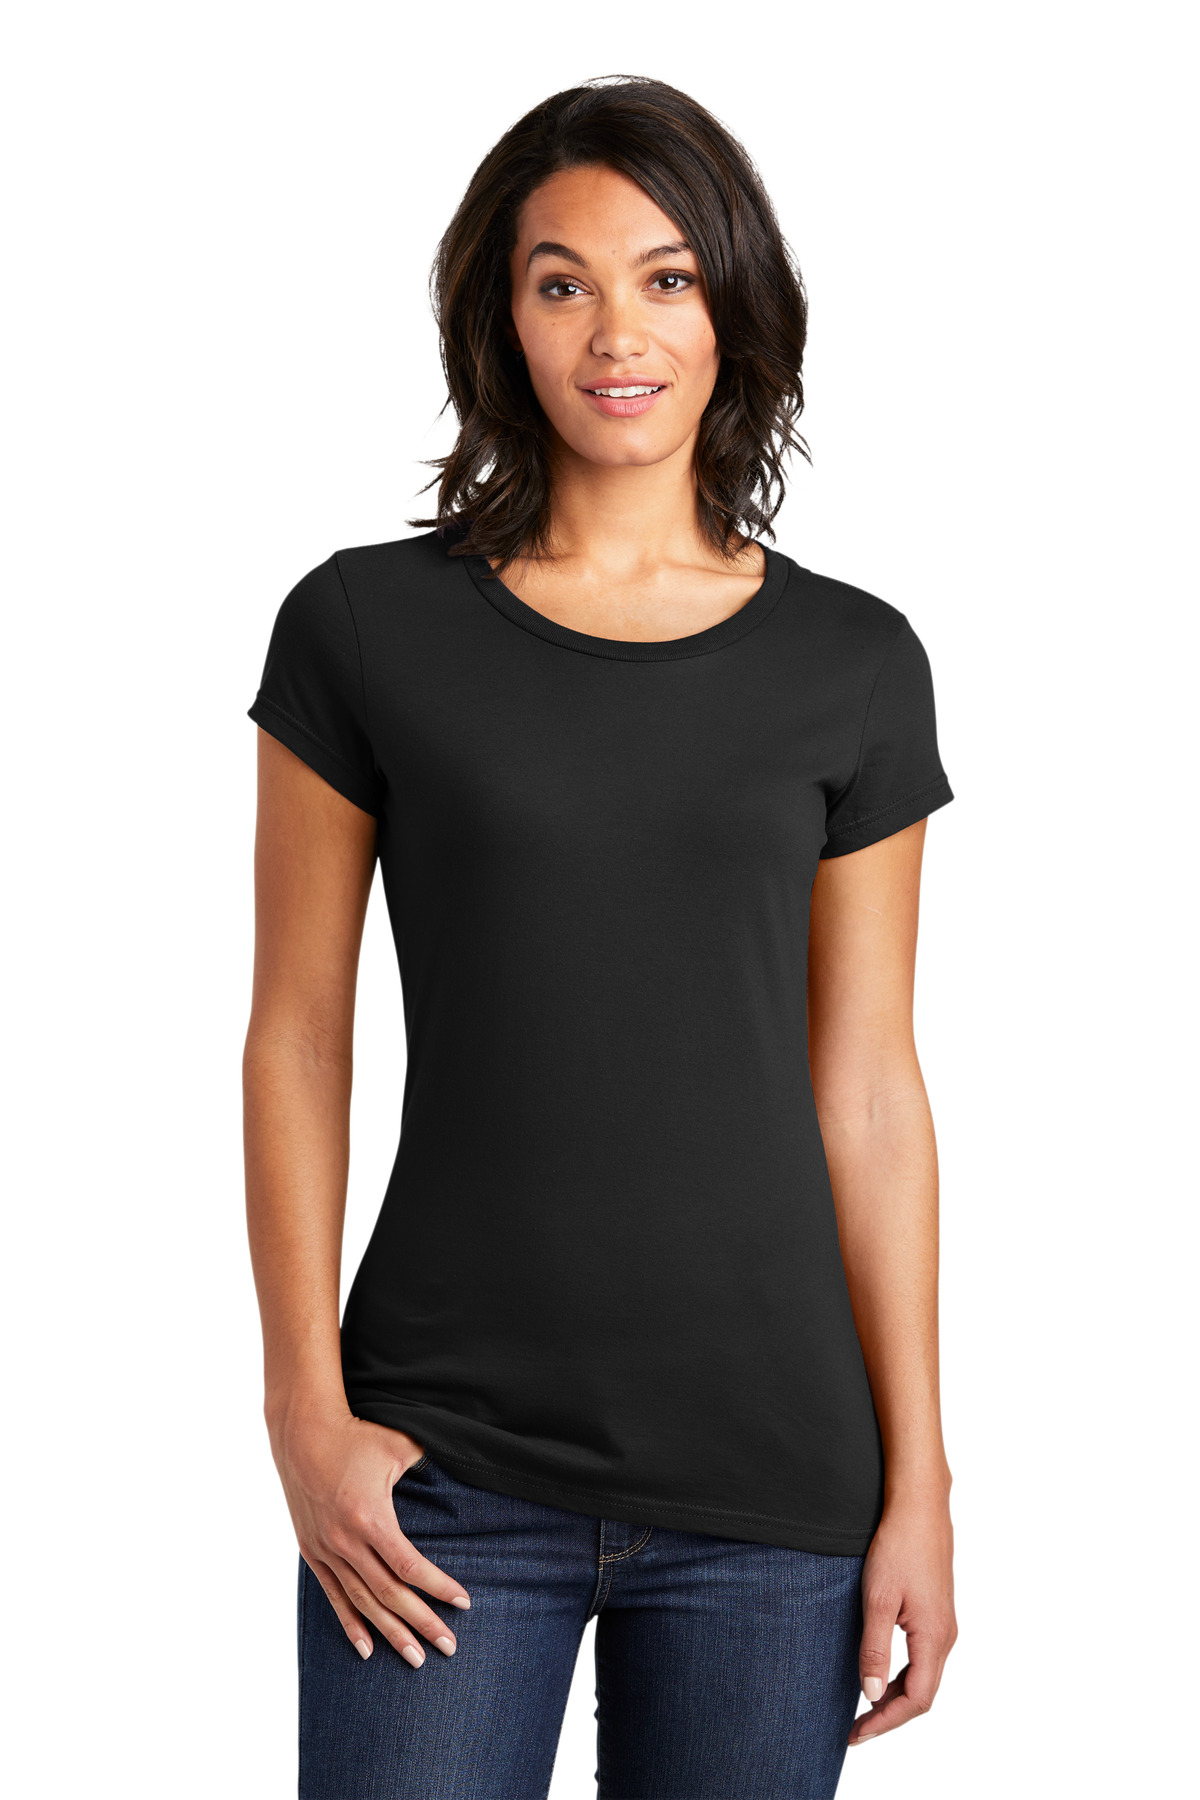 District DT6001 Black Ladies' Fitted Very Important Tee | JiffyShirts